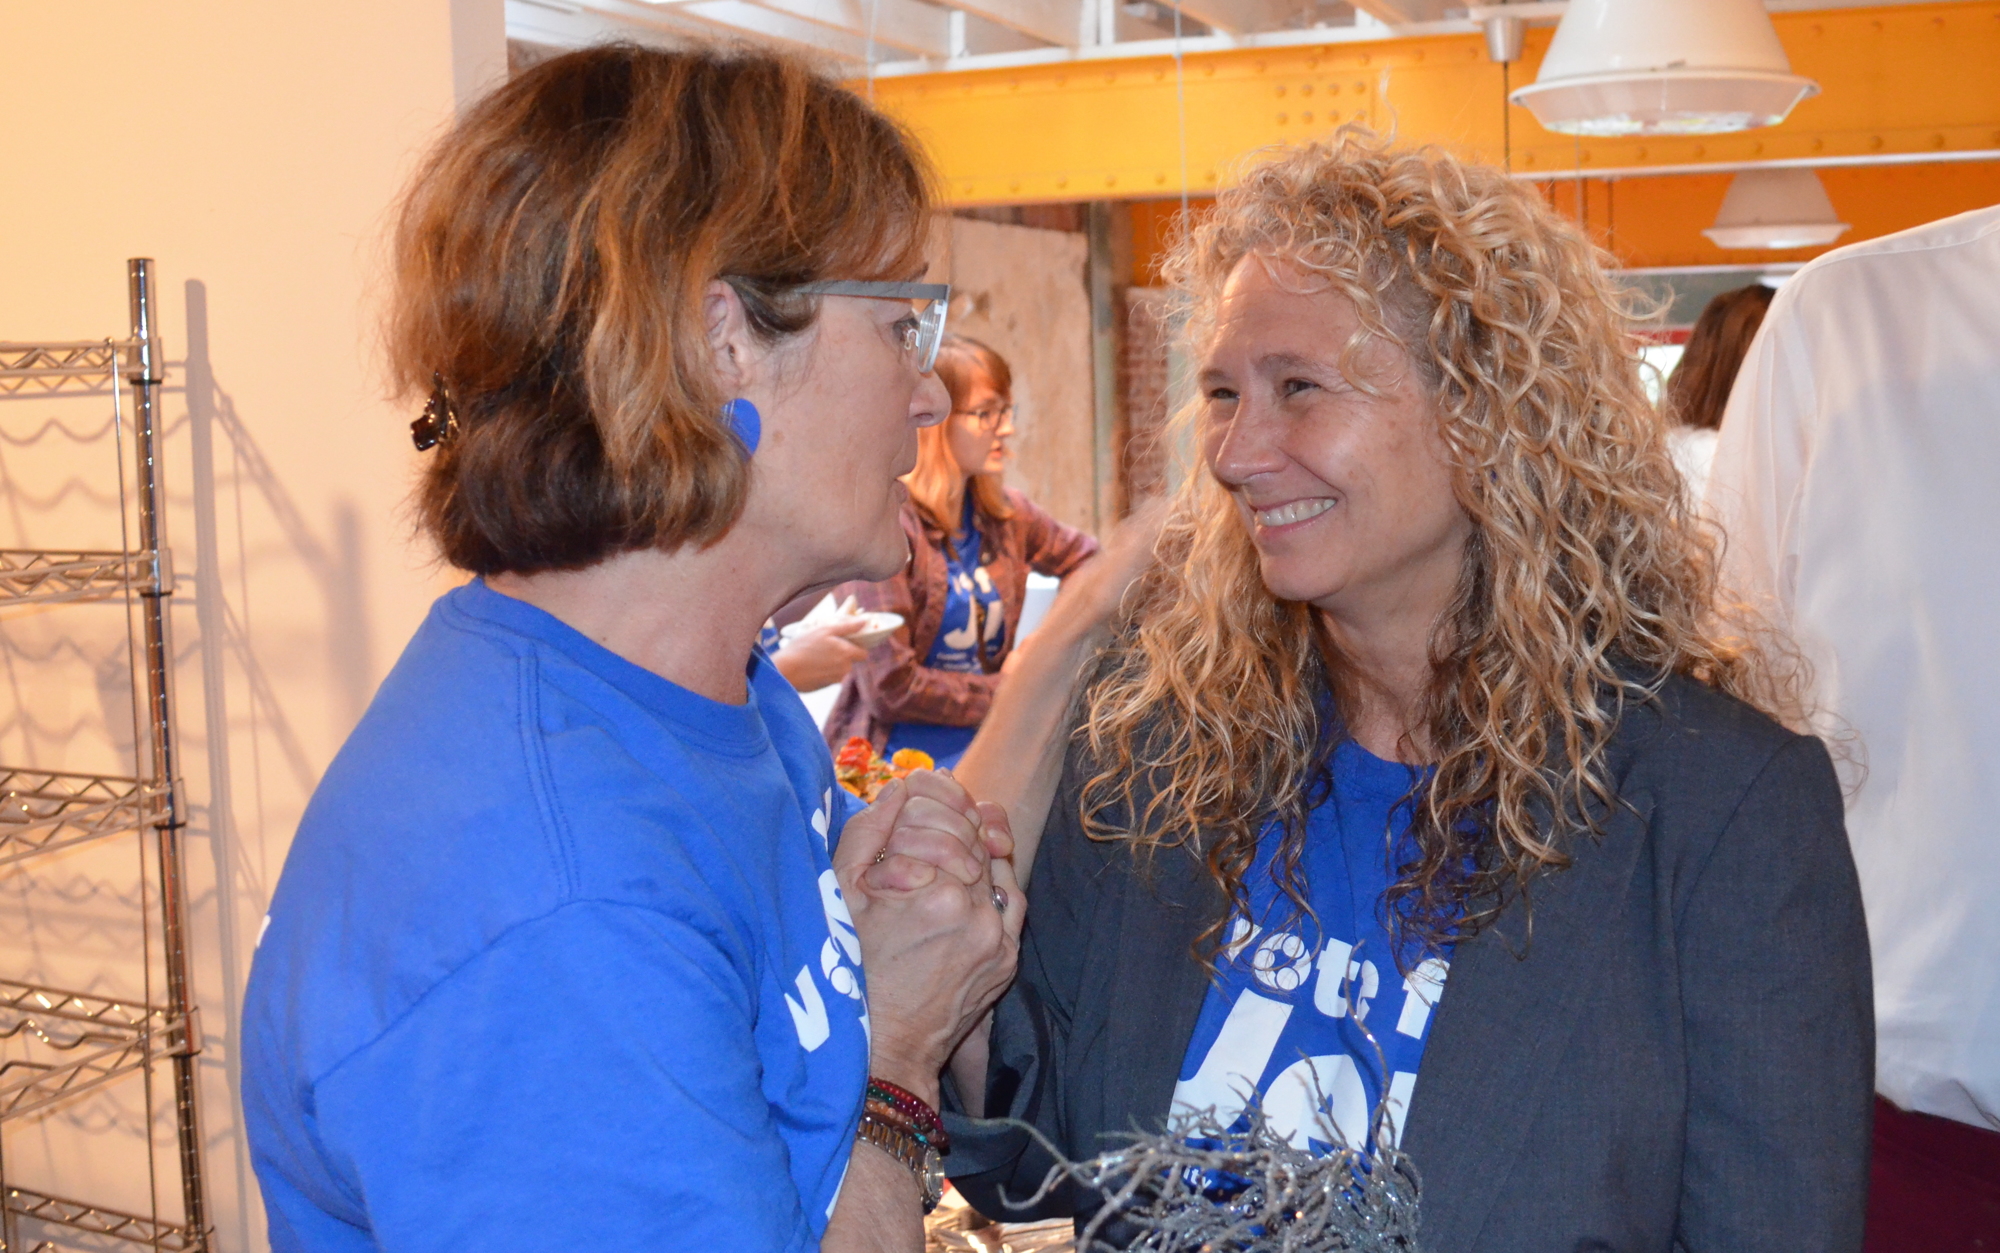 Jen Ahearn-Koch, right, celebrates the results Tuesday with campaign volunteer Kathy Kelley Ohlrich.